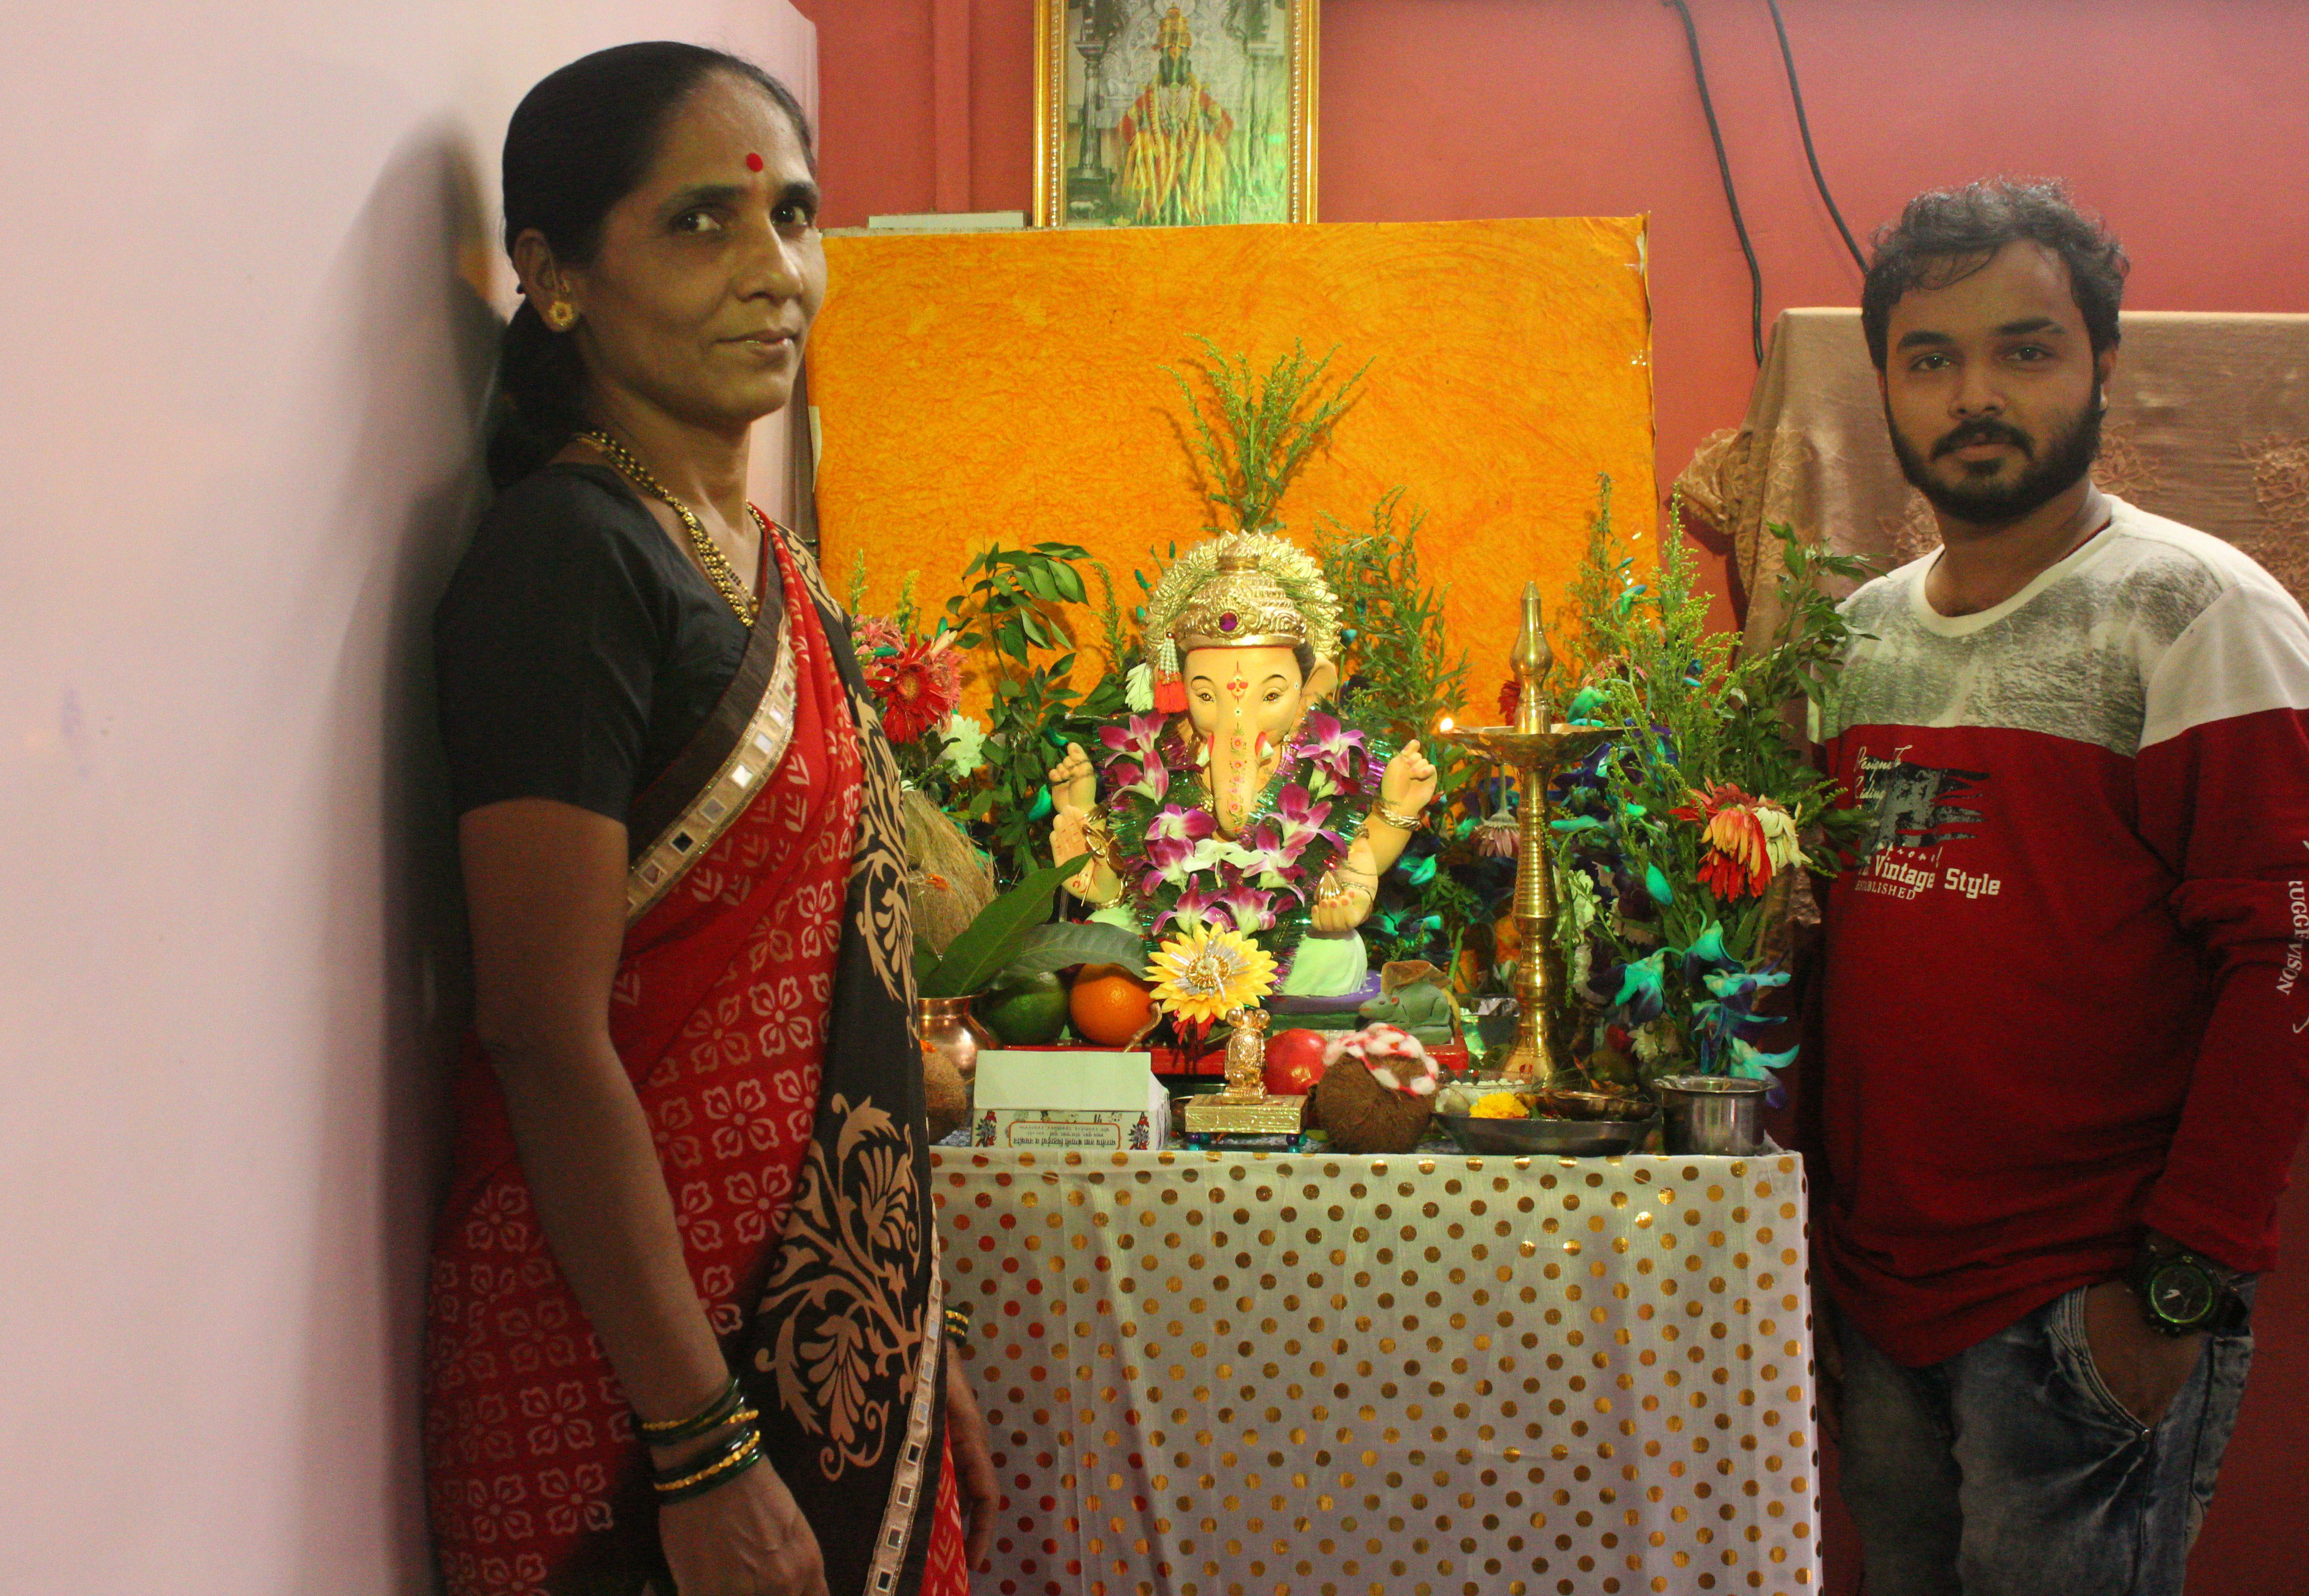 Staff standing next to a Ganesha idol. See how serene and calm he looks
